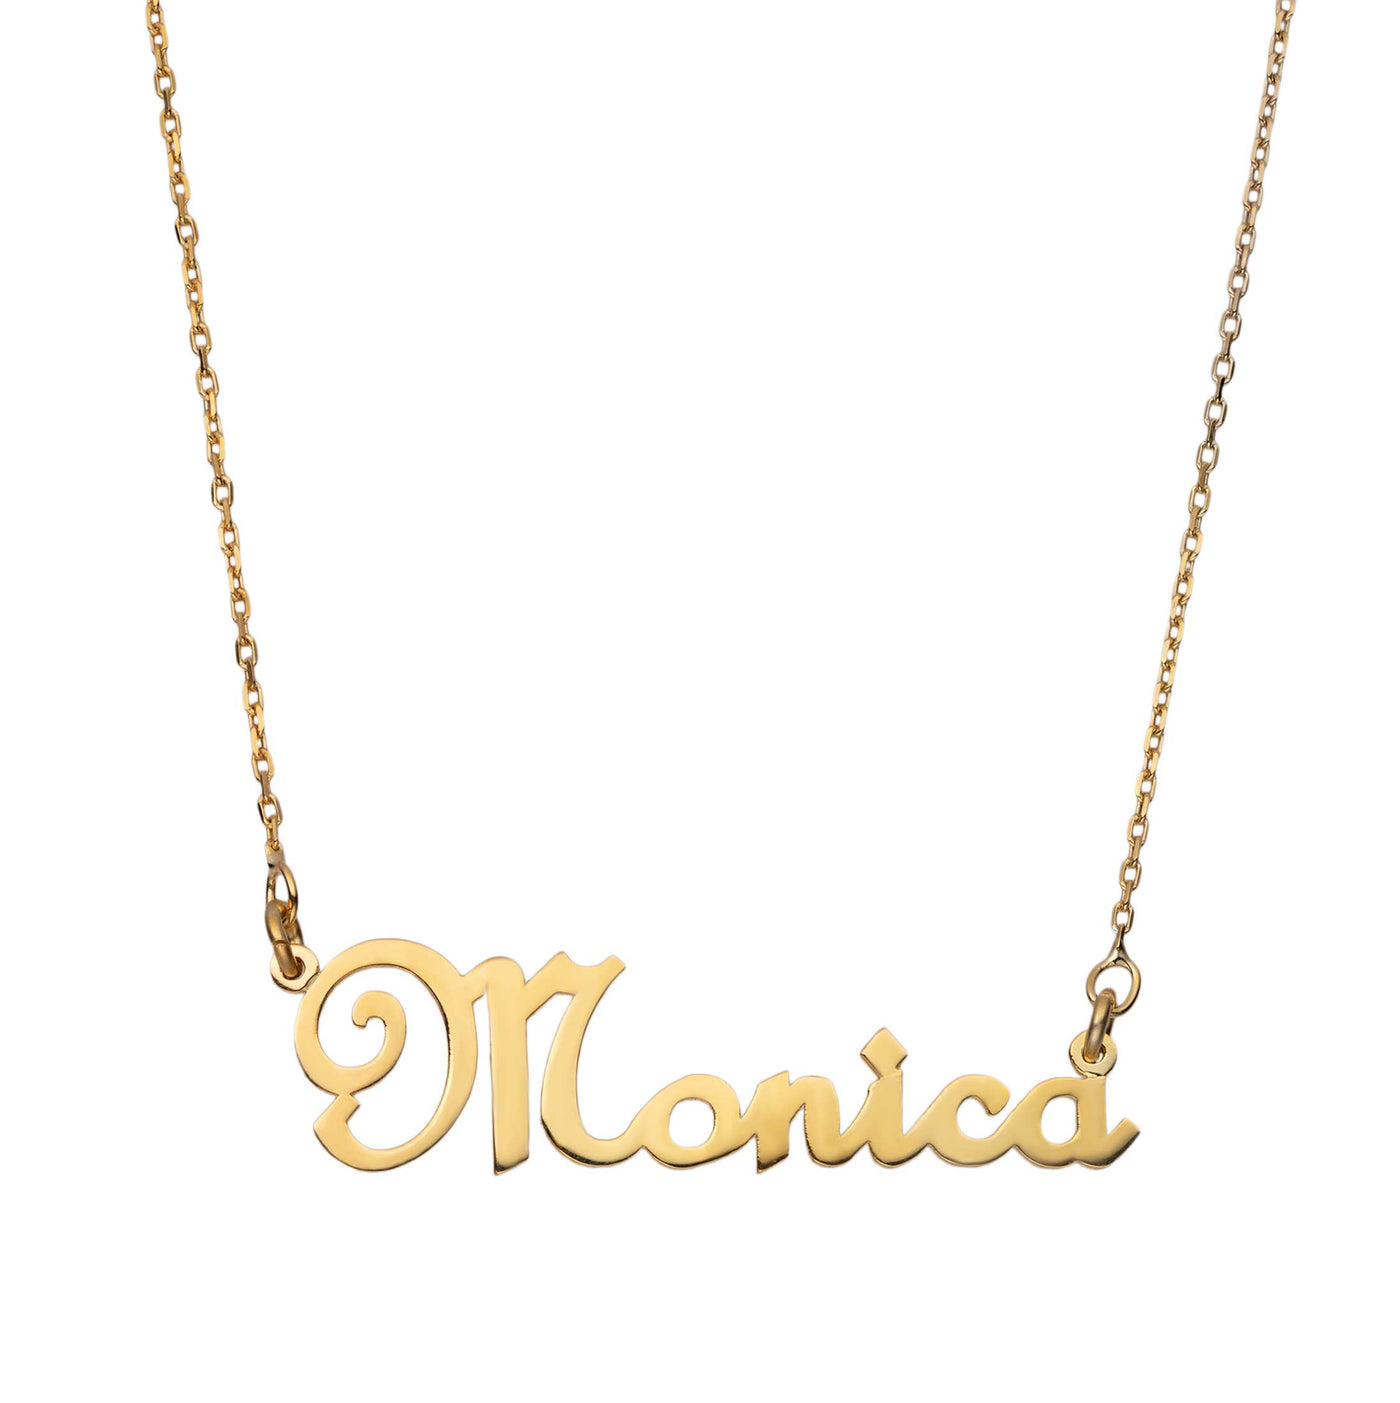 Ladies Name Plate Necklace 14K Gold - Style 174